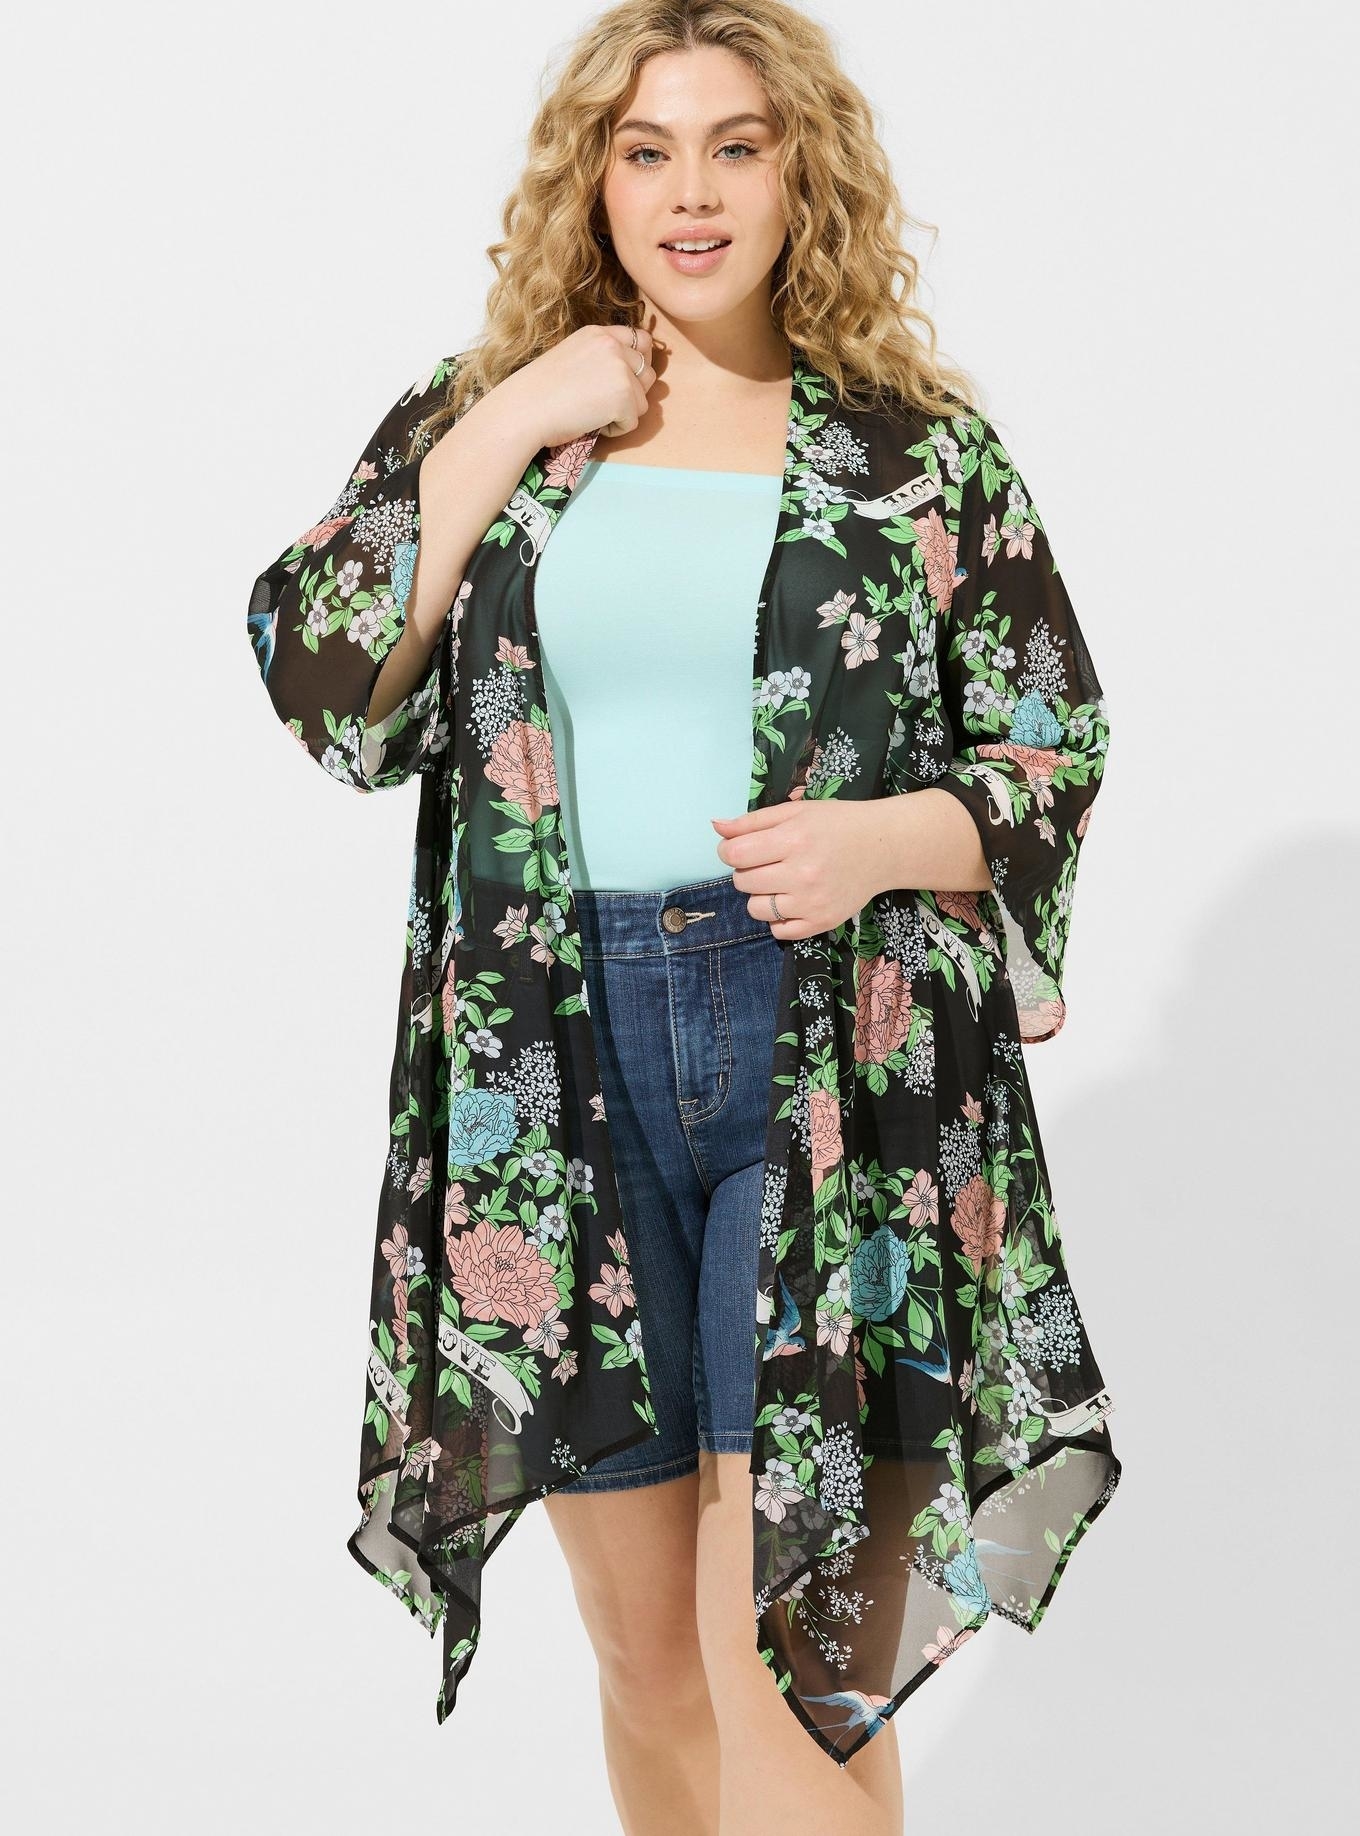 Model wearing the floral cardigan